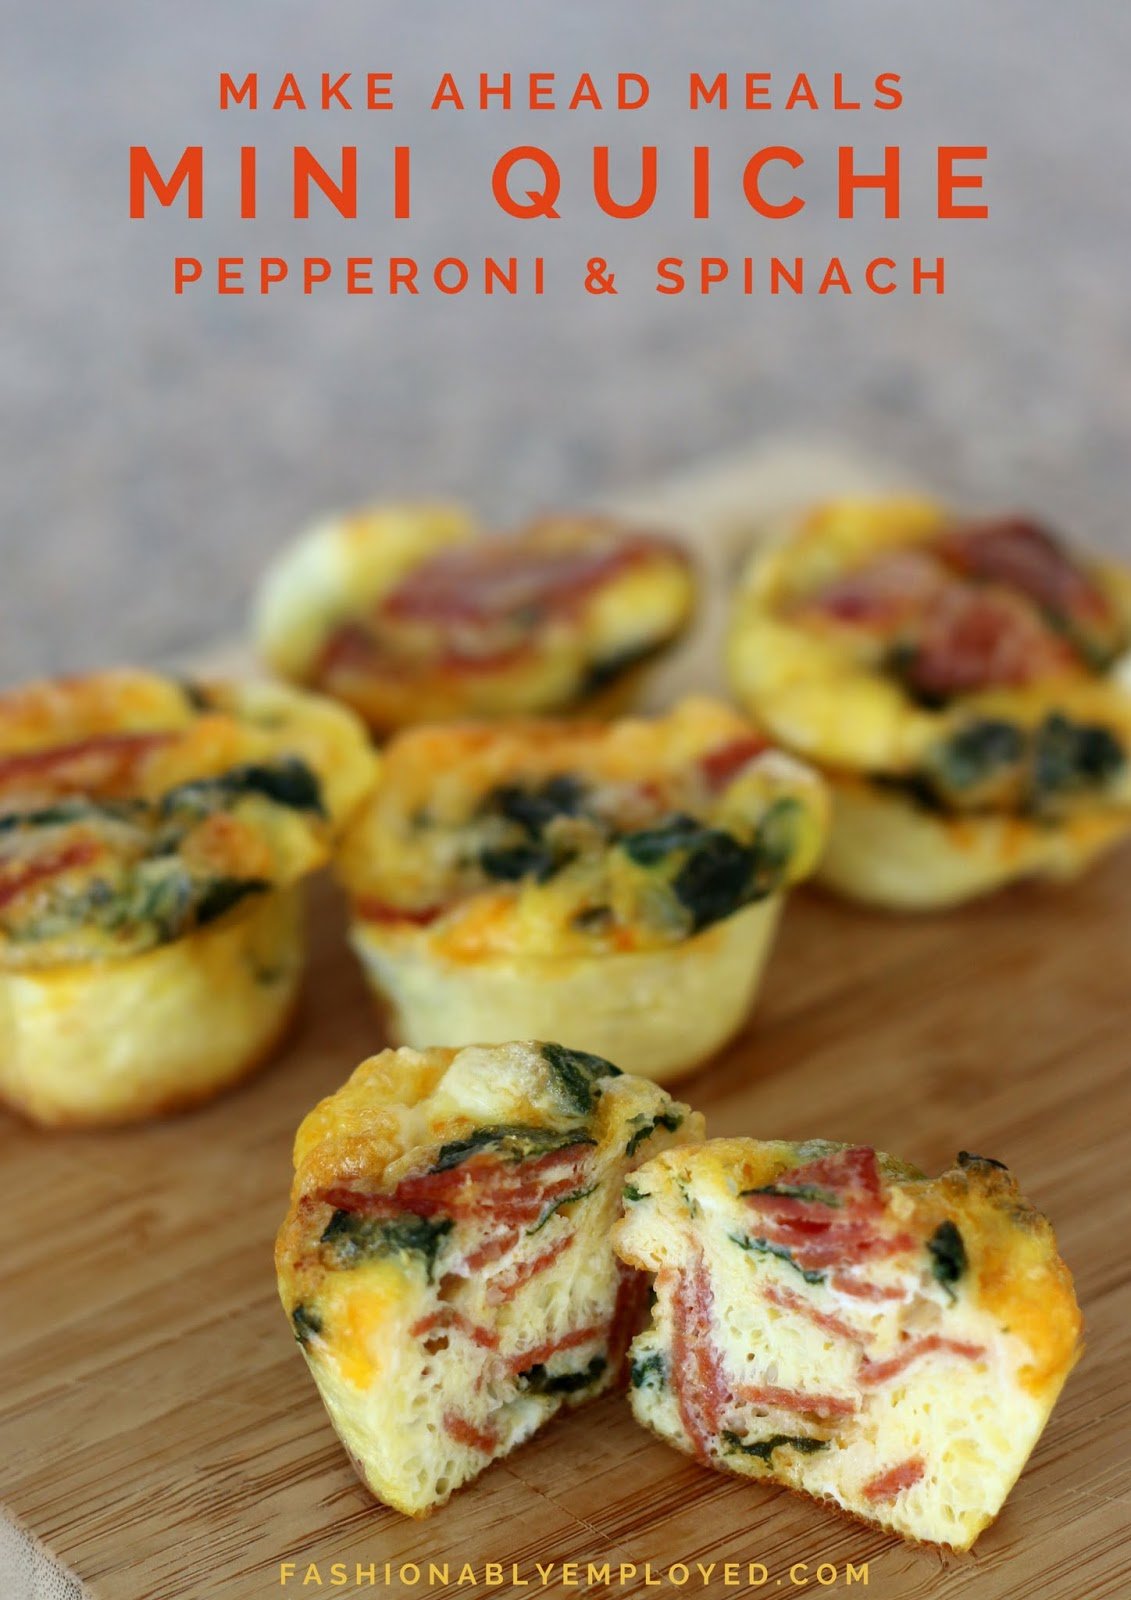 FashionablyEmployed.com | Kid-Friendly "Parisian" Inspired Lunch | Make Ahead Meal: Mini Quiche with Pepperoni & Spinach, family breakfast, lunch or dinner, easy meal prep, cook with kids